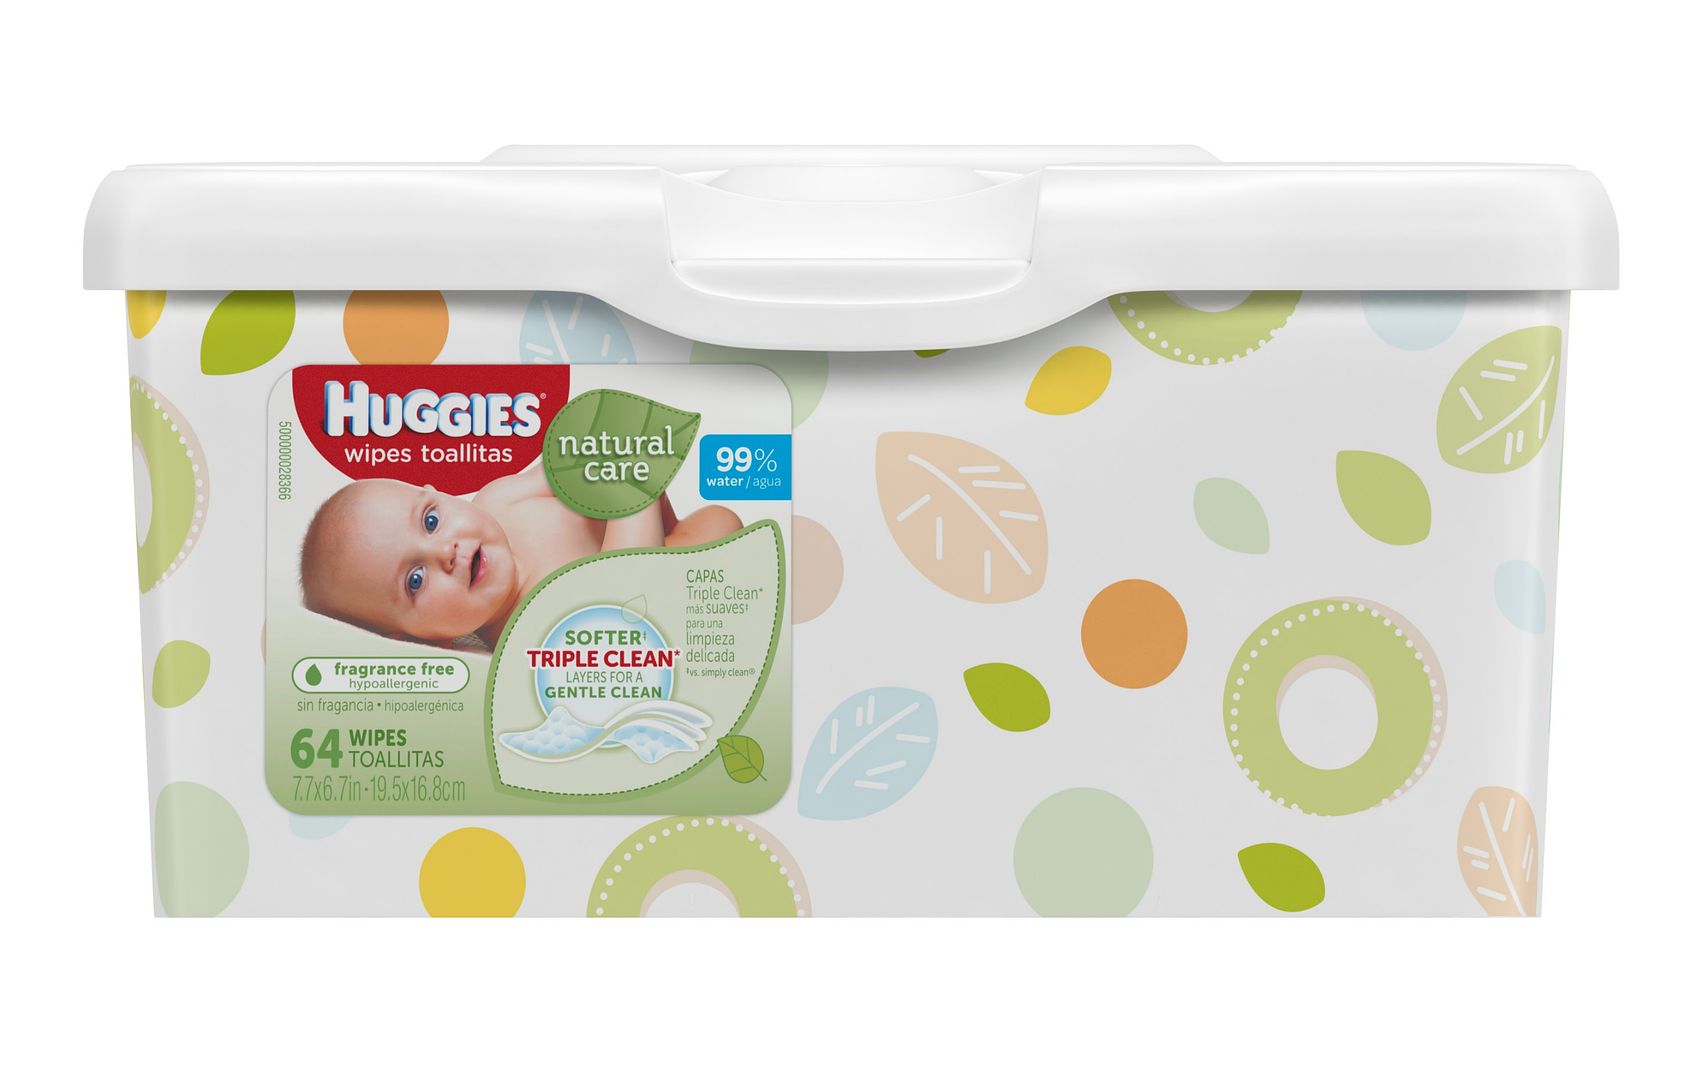 Huggies Natural Care Baby Wipes: For baby's butts + sticky hands